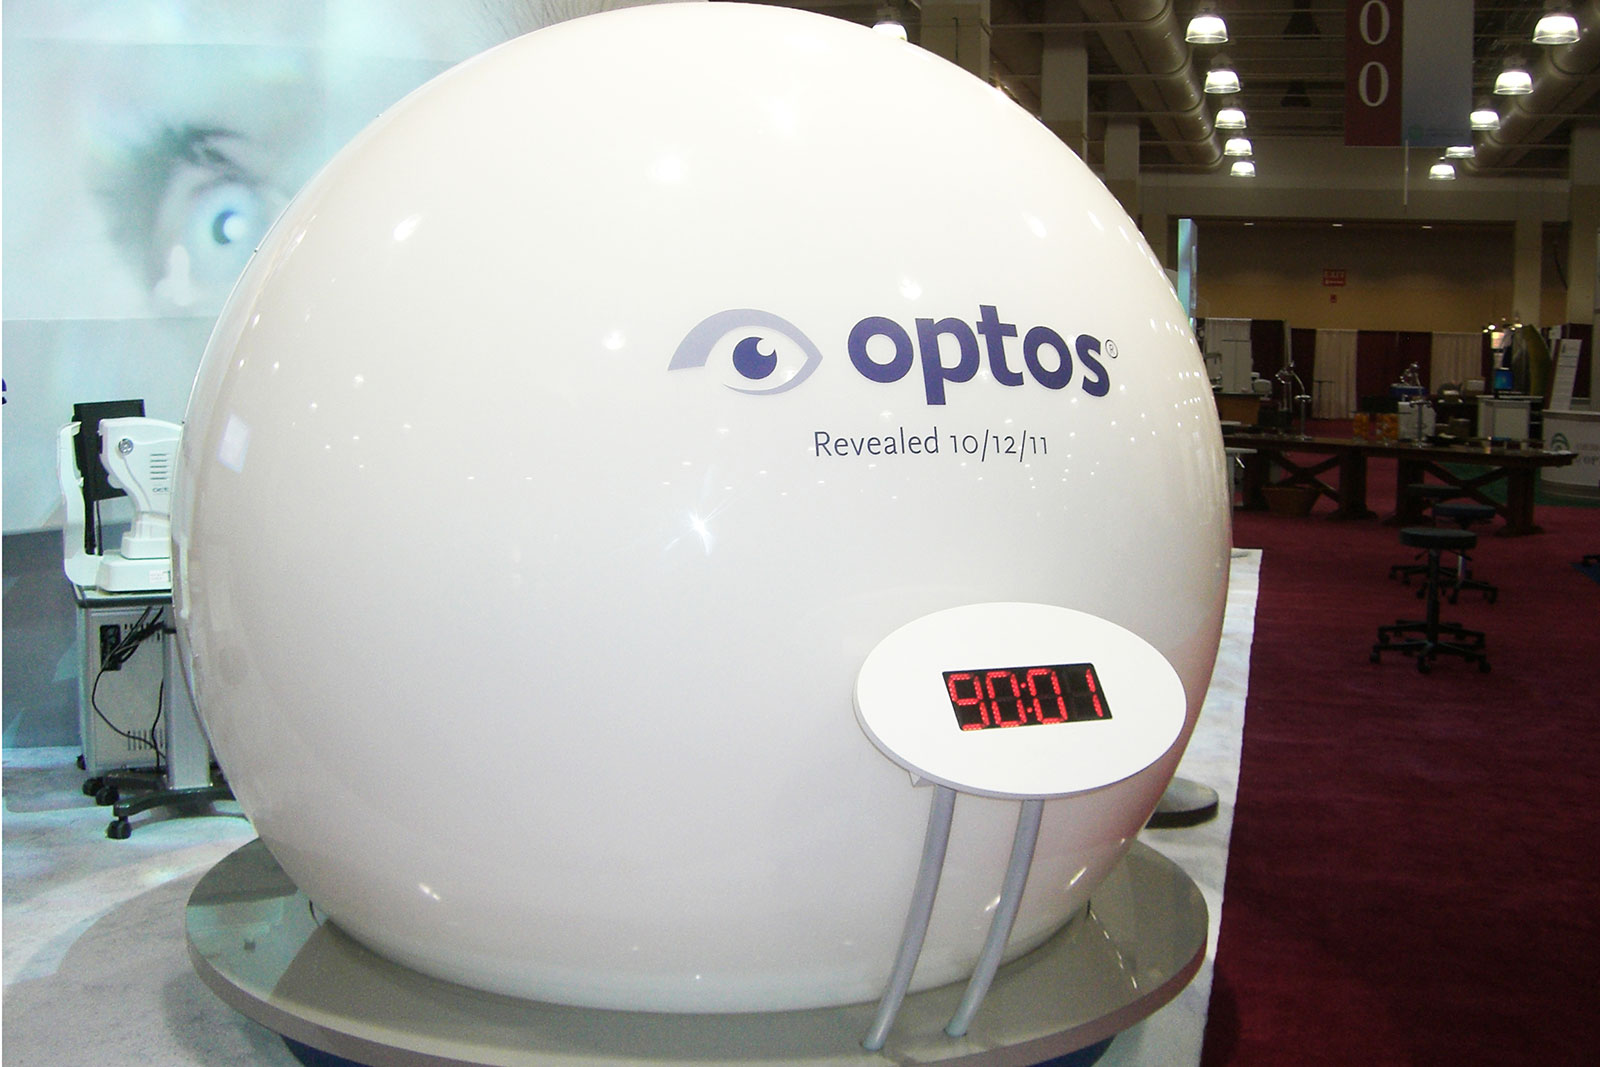 Custom Branded Environment for Optos at Academy of Optometry Trade Show, Product Launch